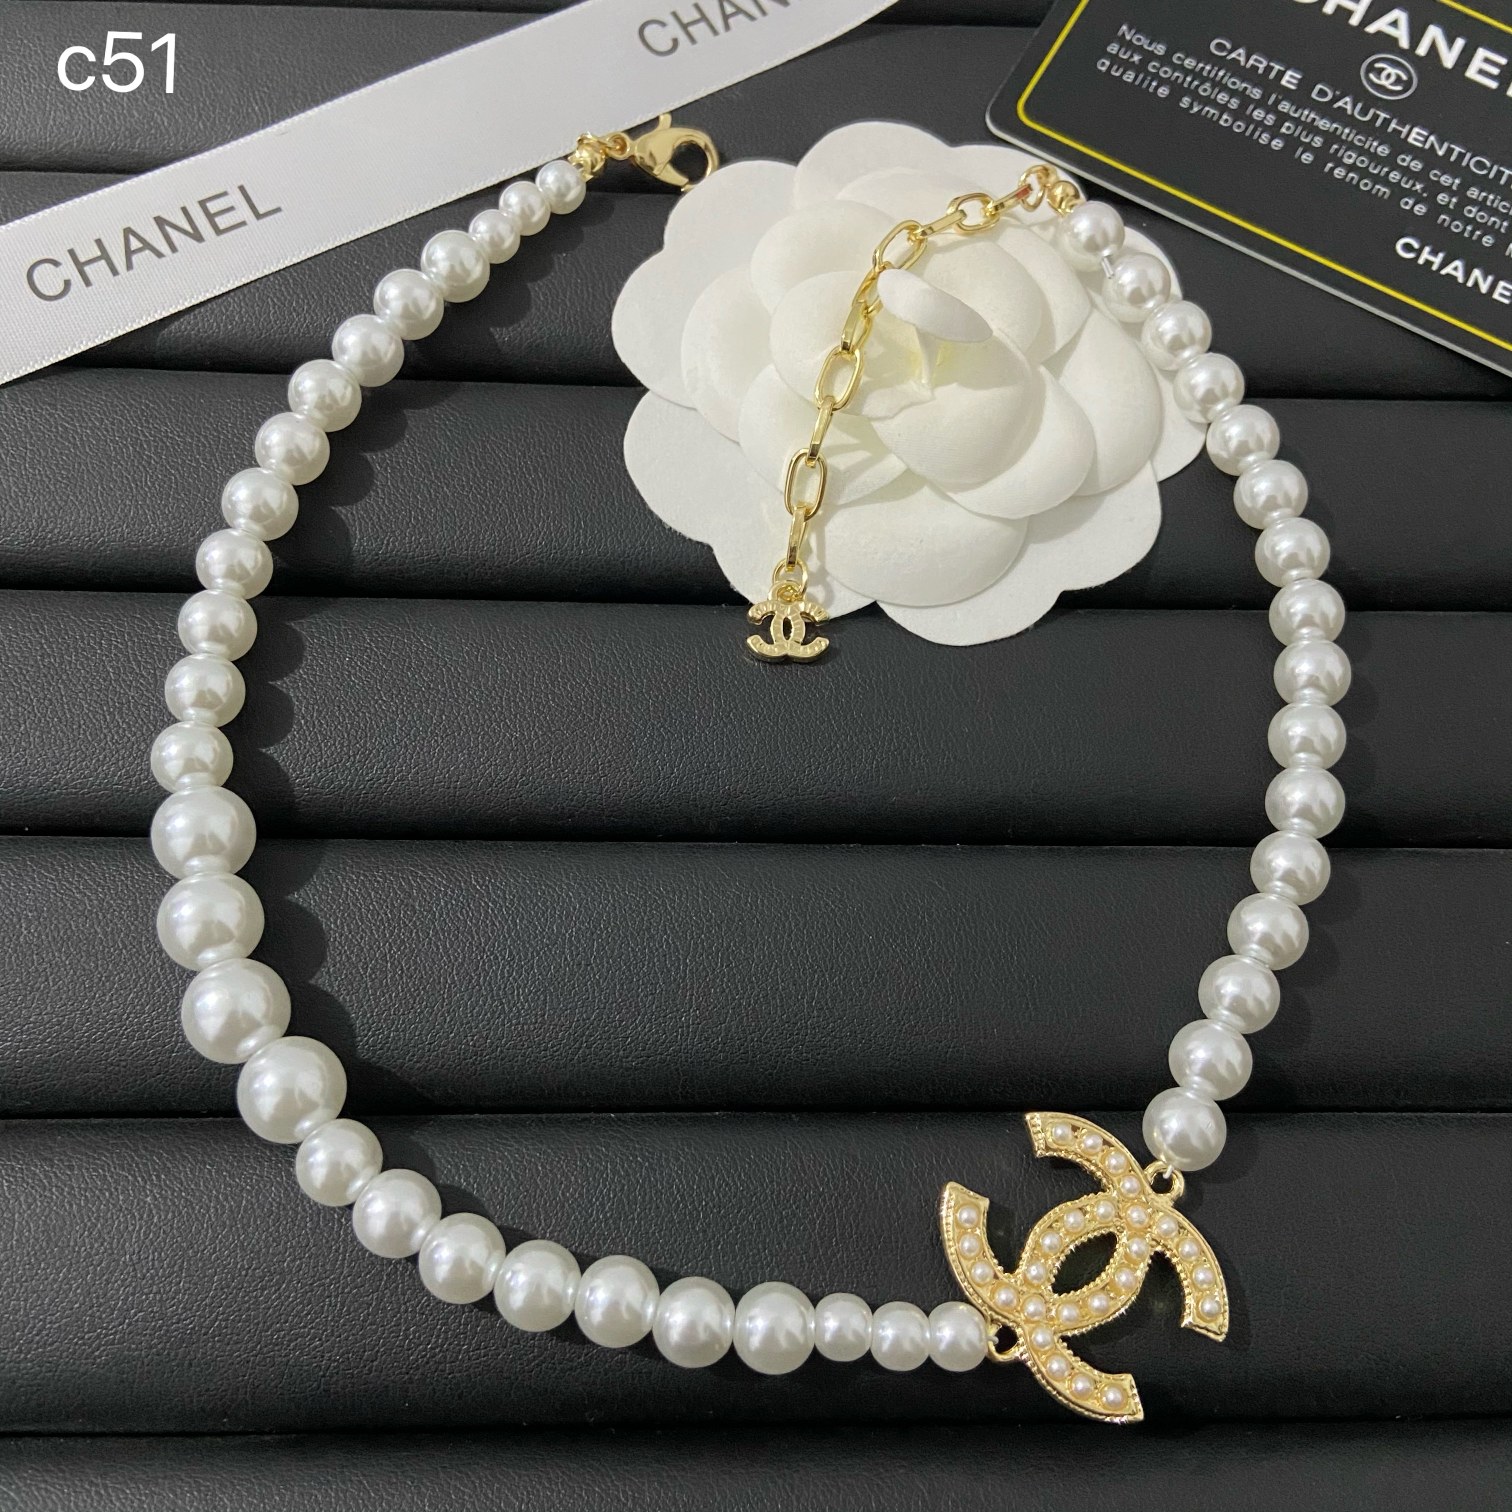 Chanel necklace 111007